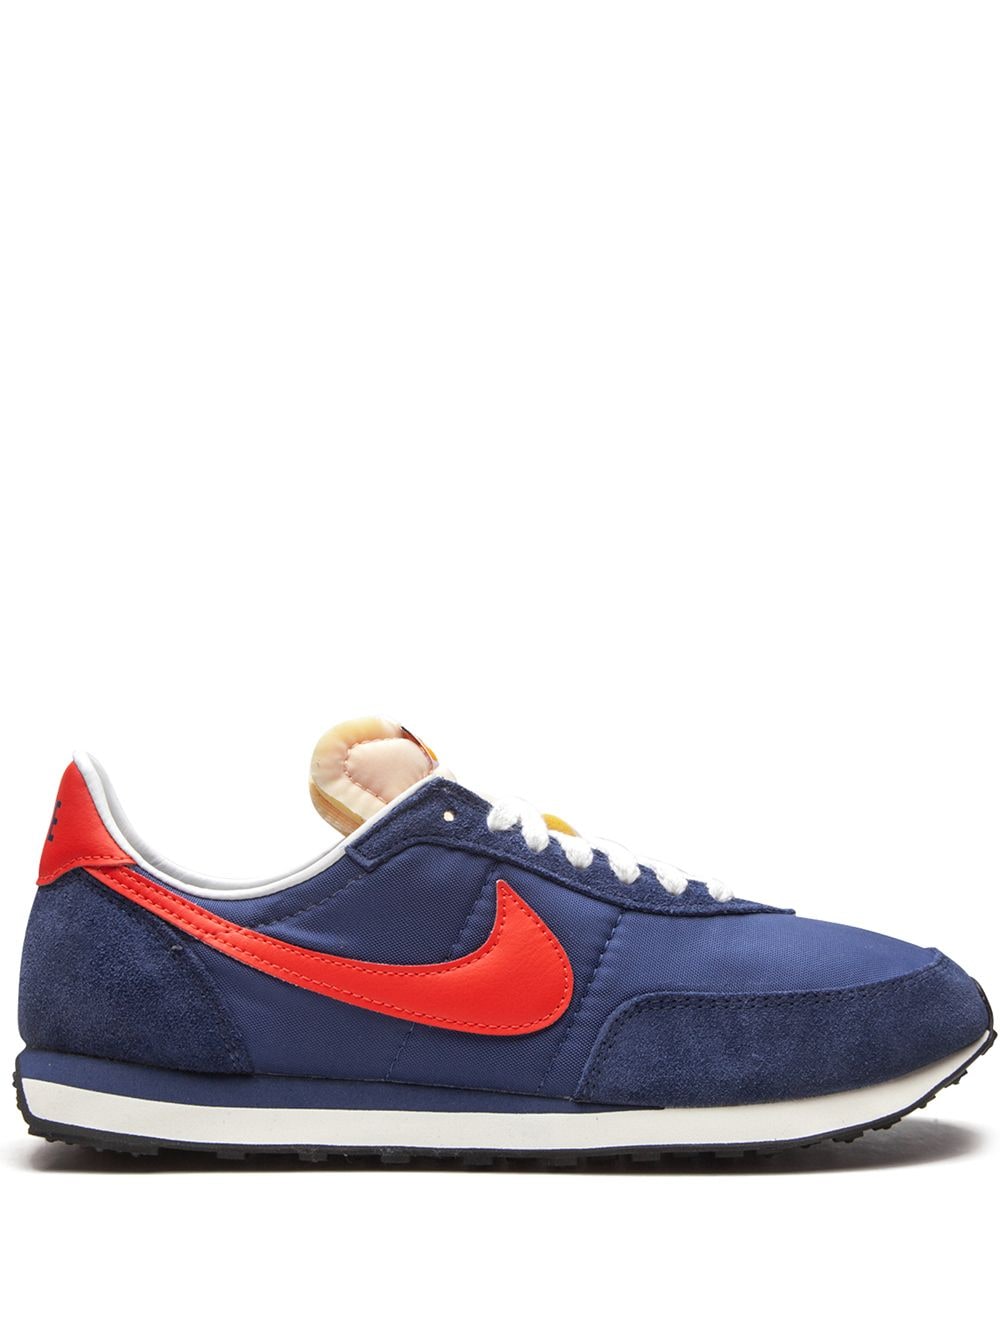 Nike Waffle Trainer 2 SP "Midnight Navy" sneakers - Blue von Nike